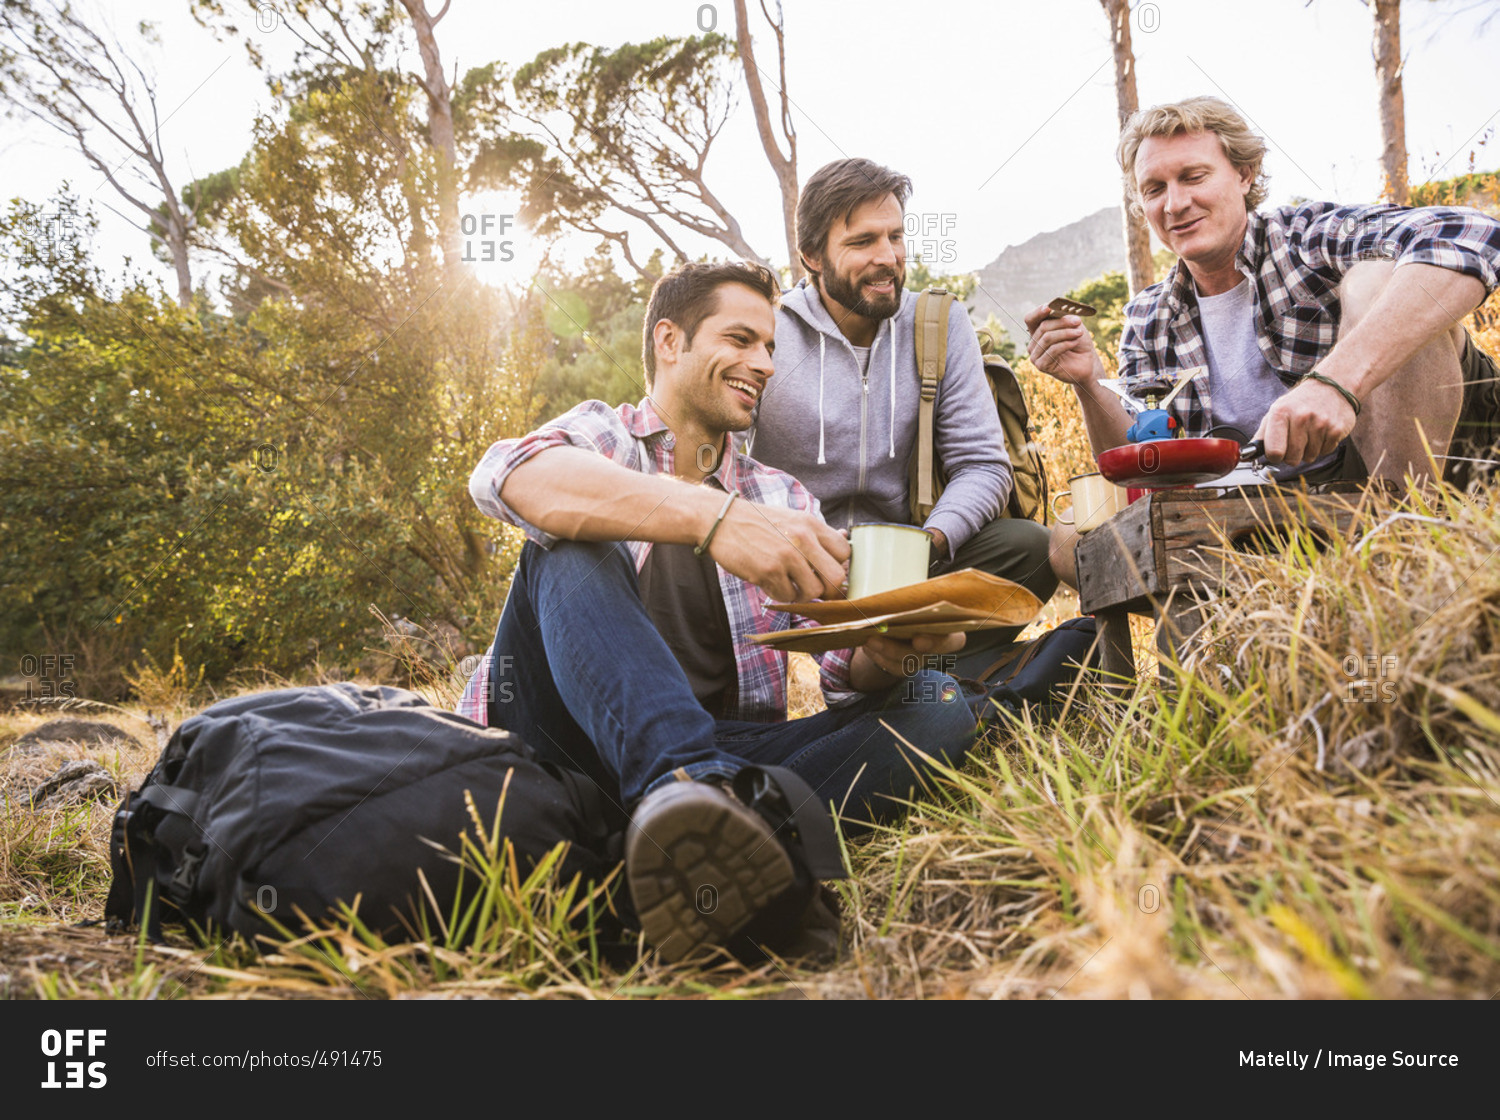 Three men frying breakfast on camping stove in forest, Deer Park, Cape Town, South Africa